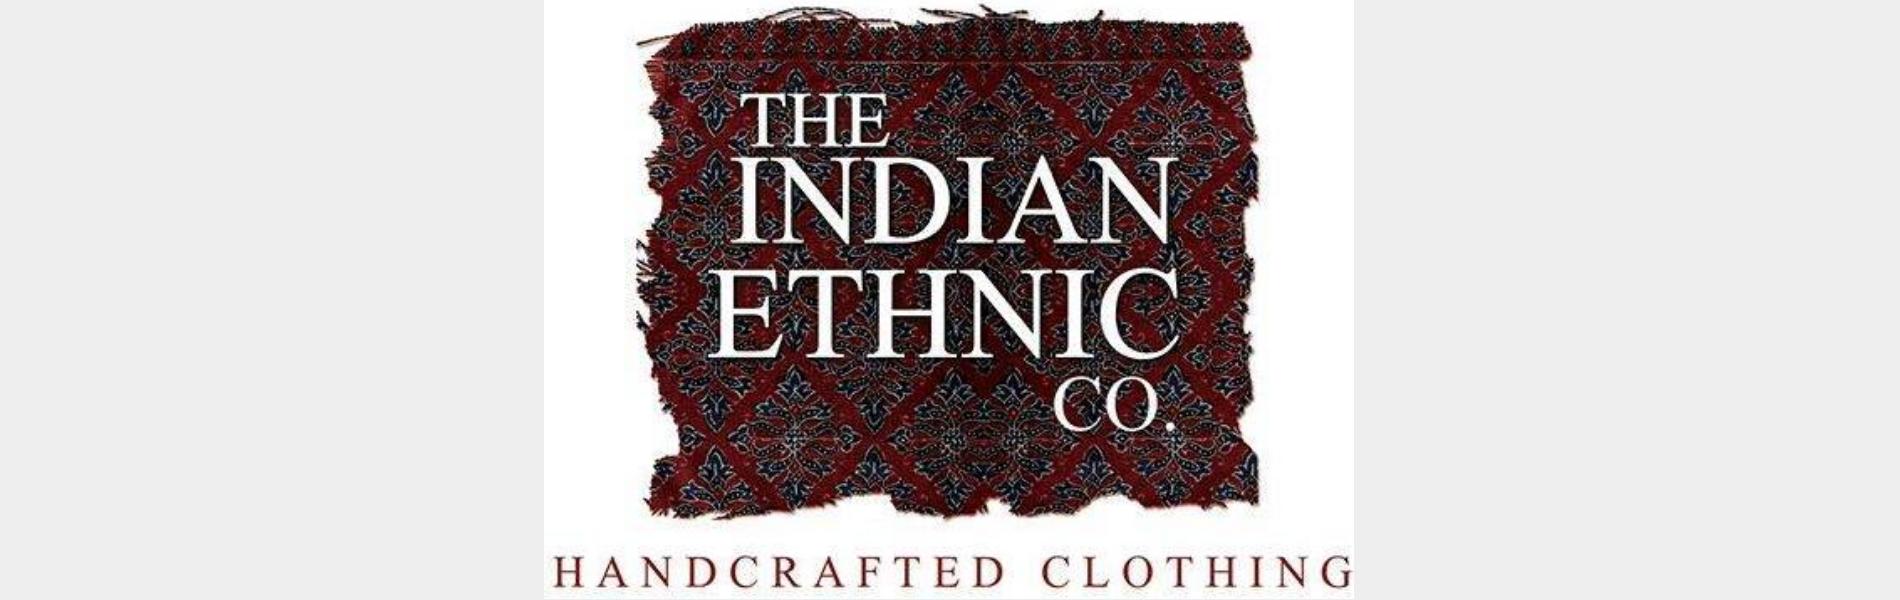 The Indian Ethnic Co.